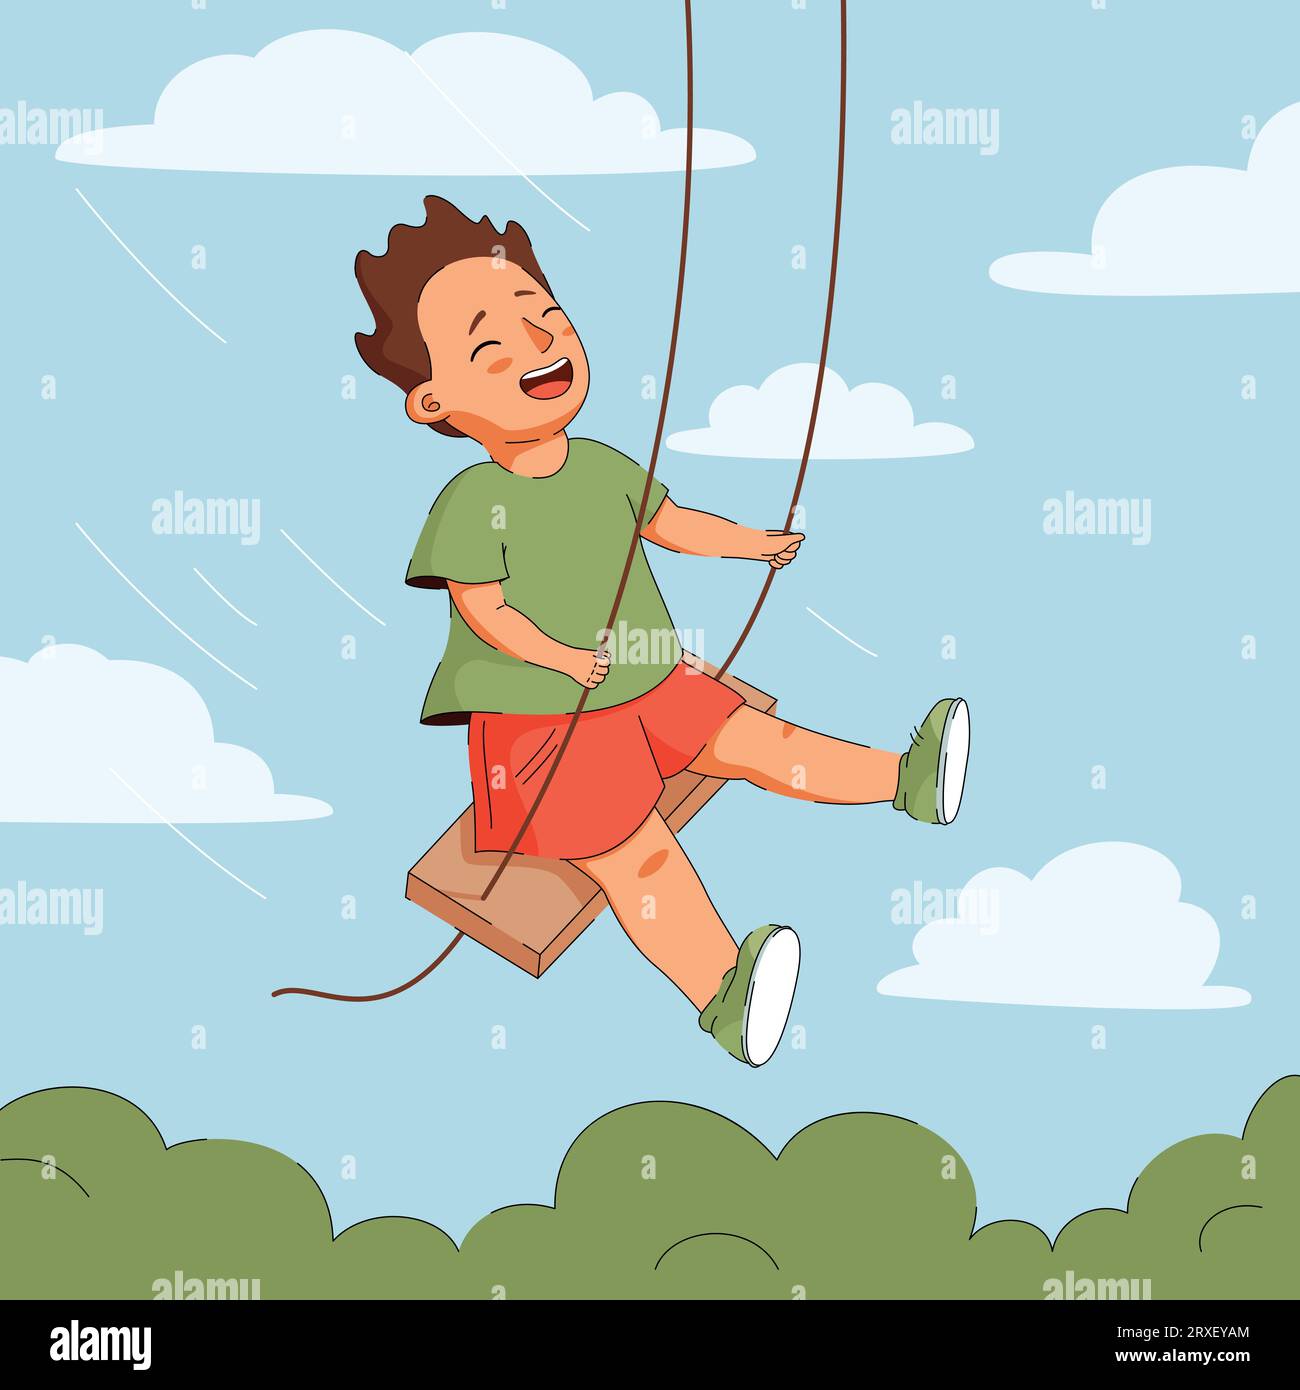 the boy swings and laughs kid play, cartoon vector Stock Vector